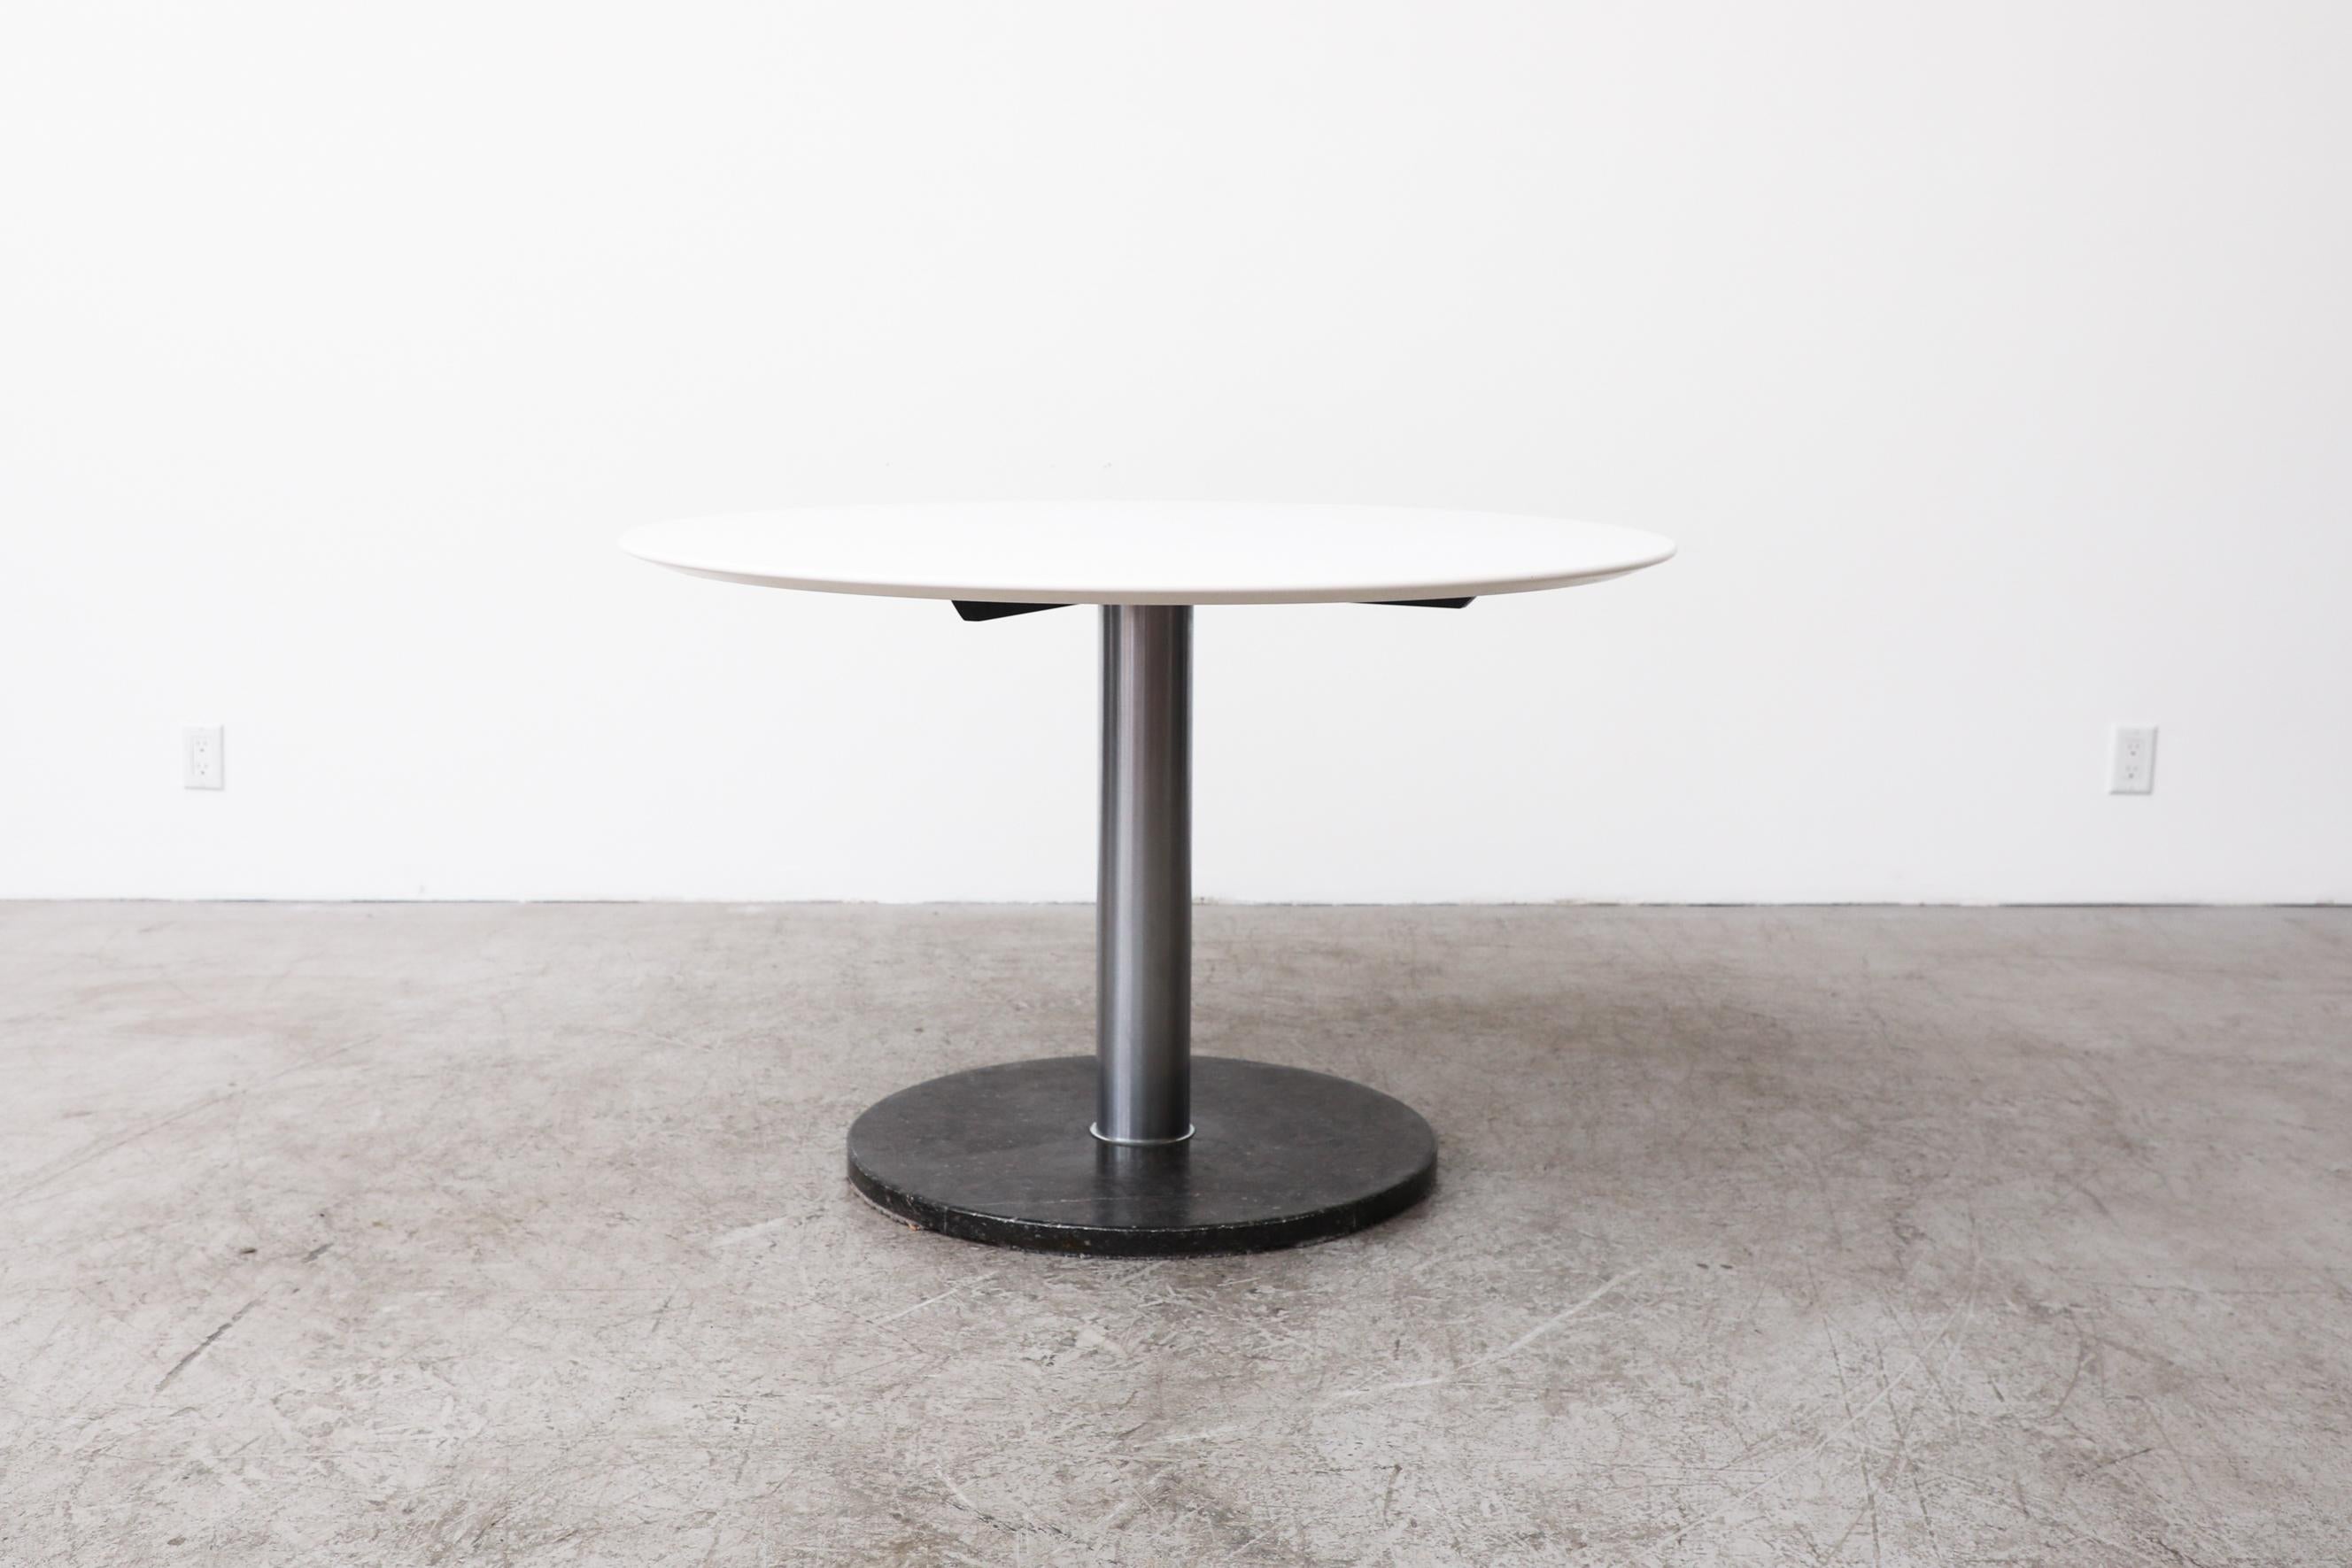 Round pedestal dining table with black marble base, chrome pedestal and white laminate table top. In original condition with visible wear, including visible wear and markings to the marble. Table top may not be original to the base. Wear is